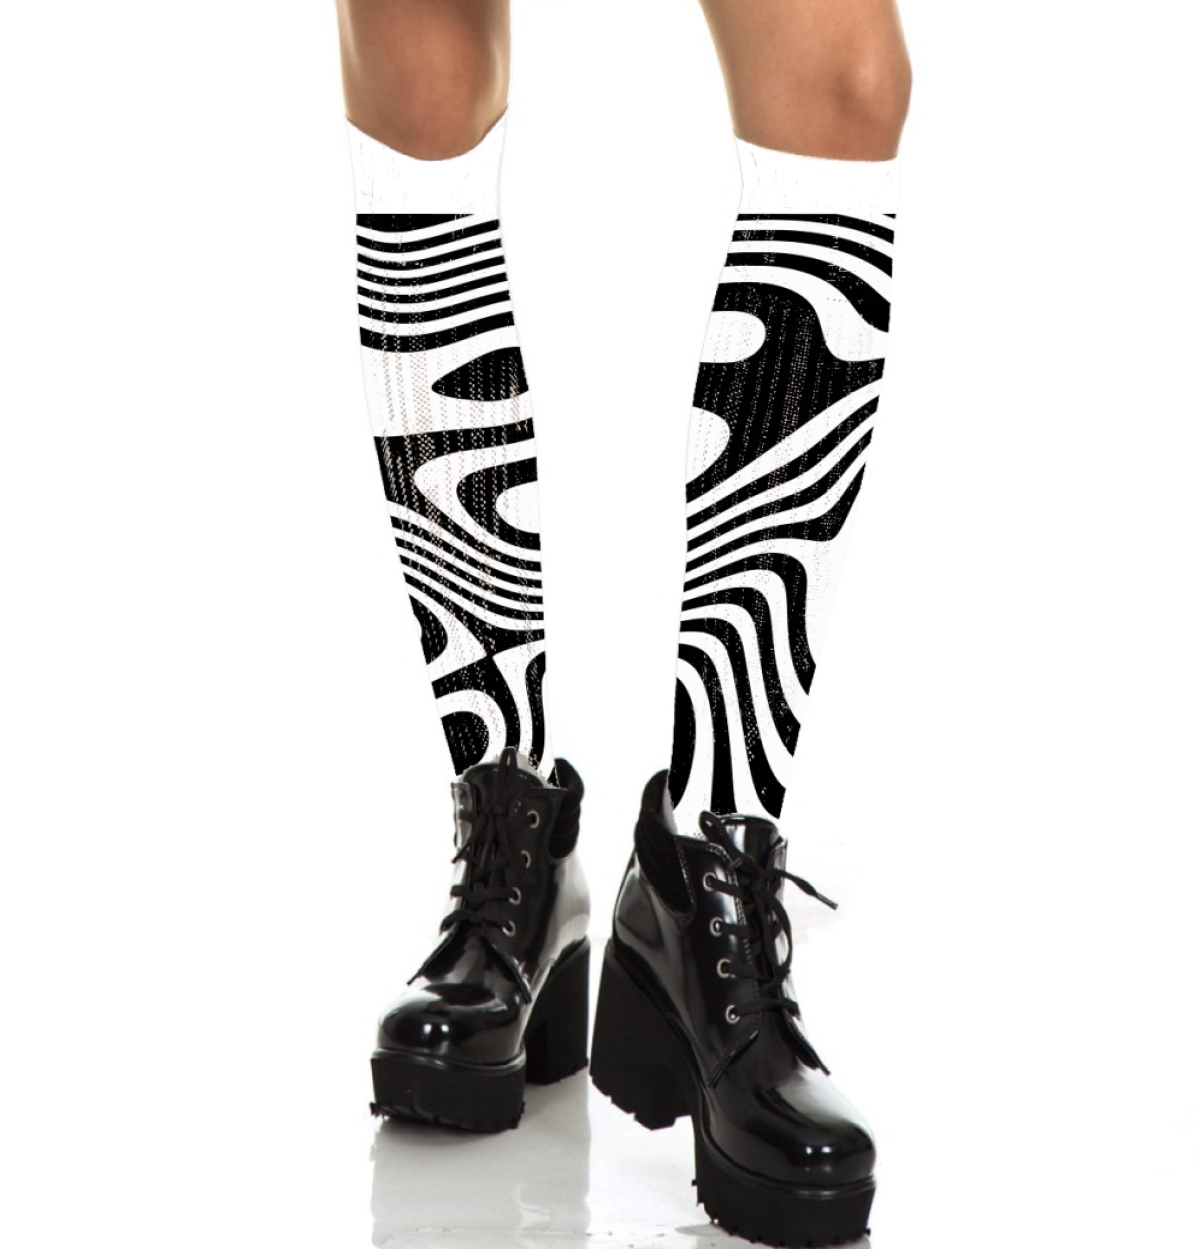 Women's black and white allover socks in the colors of the Black Radish